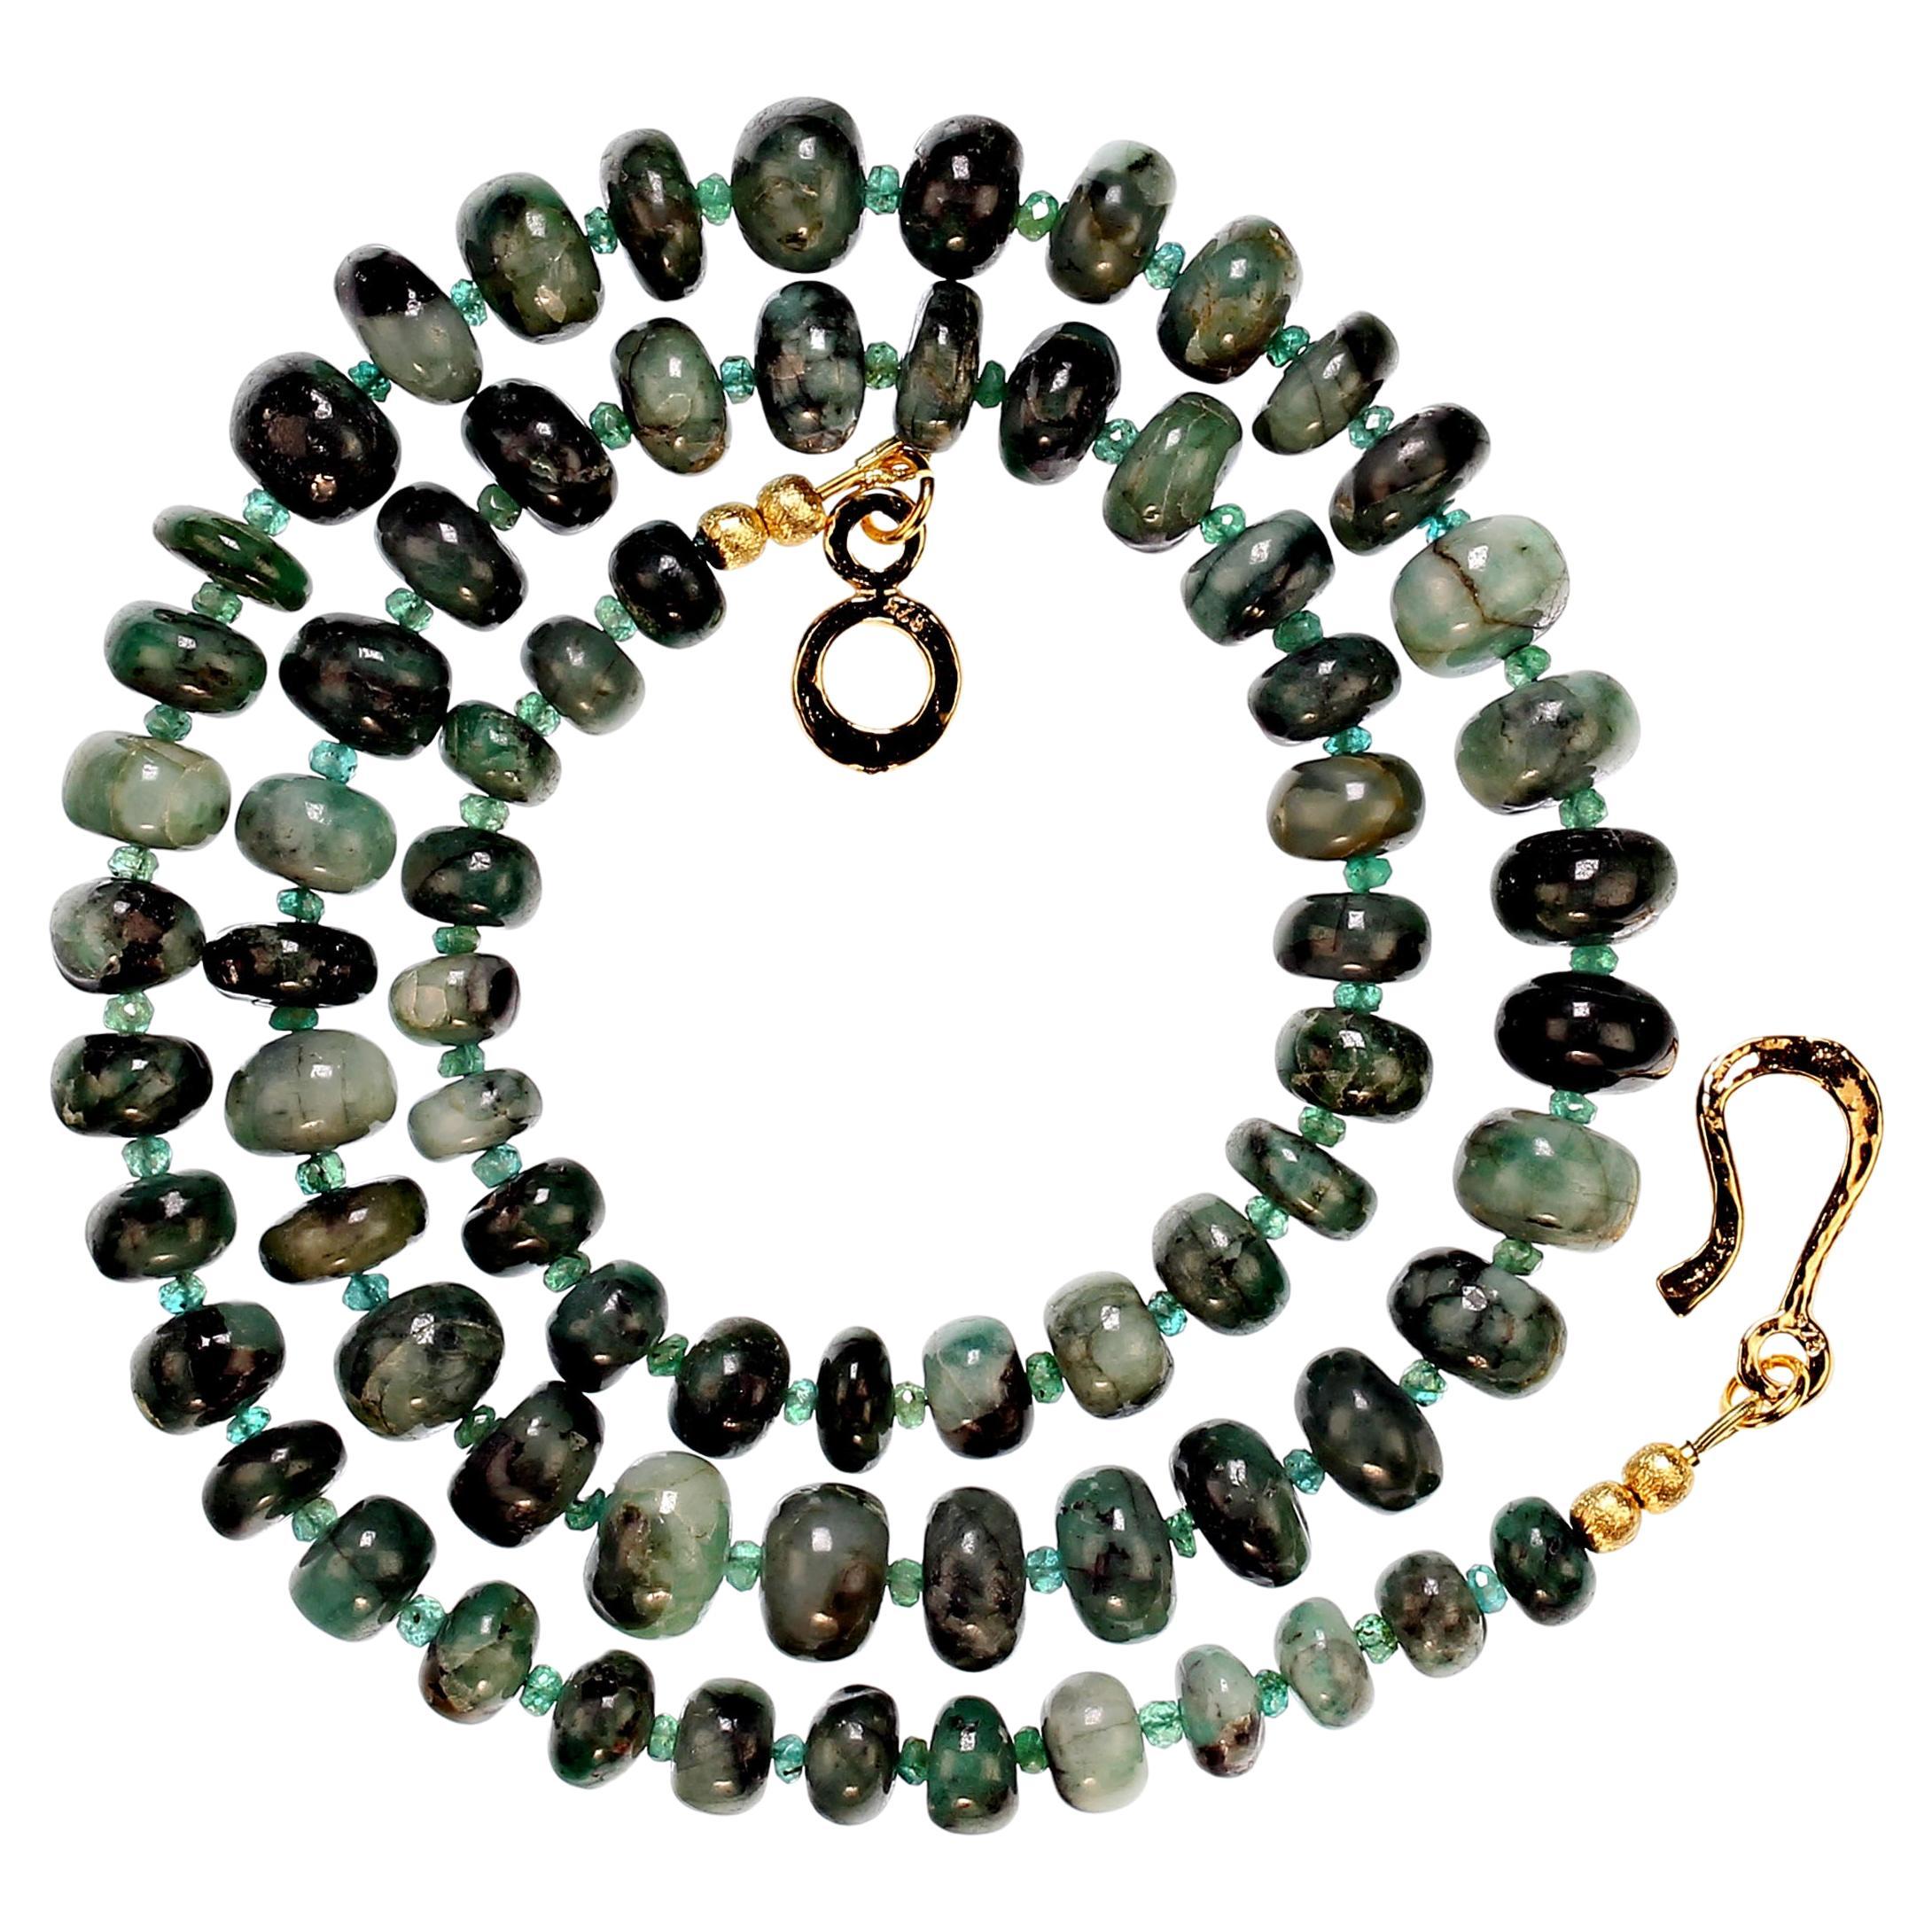 25 Inch graduated emerald matrix necklace with faceted emerald, 3.5mm, accents.  The emeralds graduate 8-11mm and are lovely highly polished smooth rondelles. The necklace is secured with a yellow vermeil 14K hook and eye clasp.  MN2363